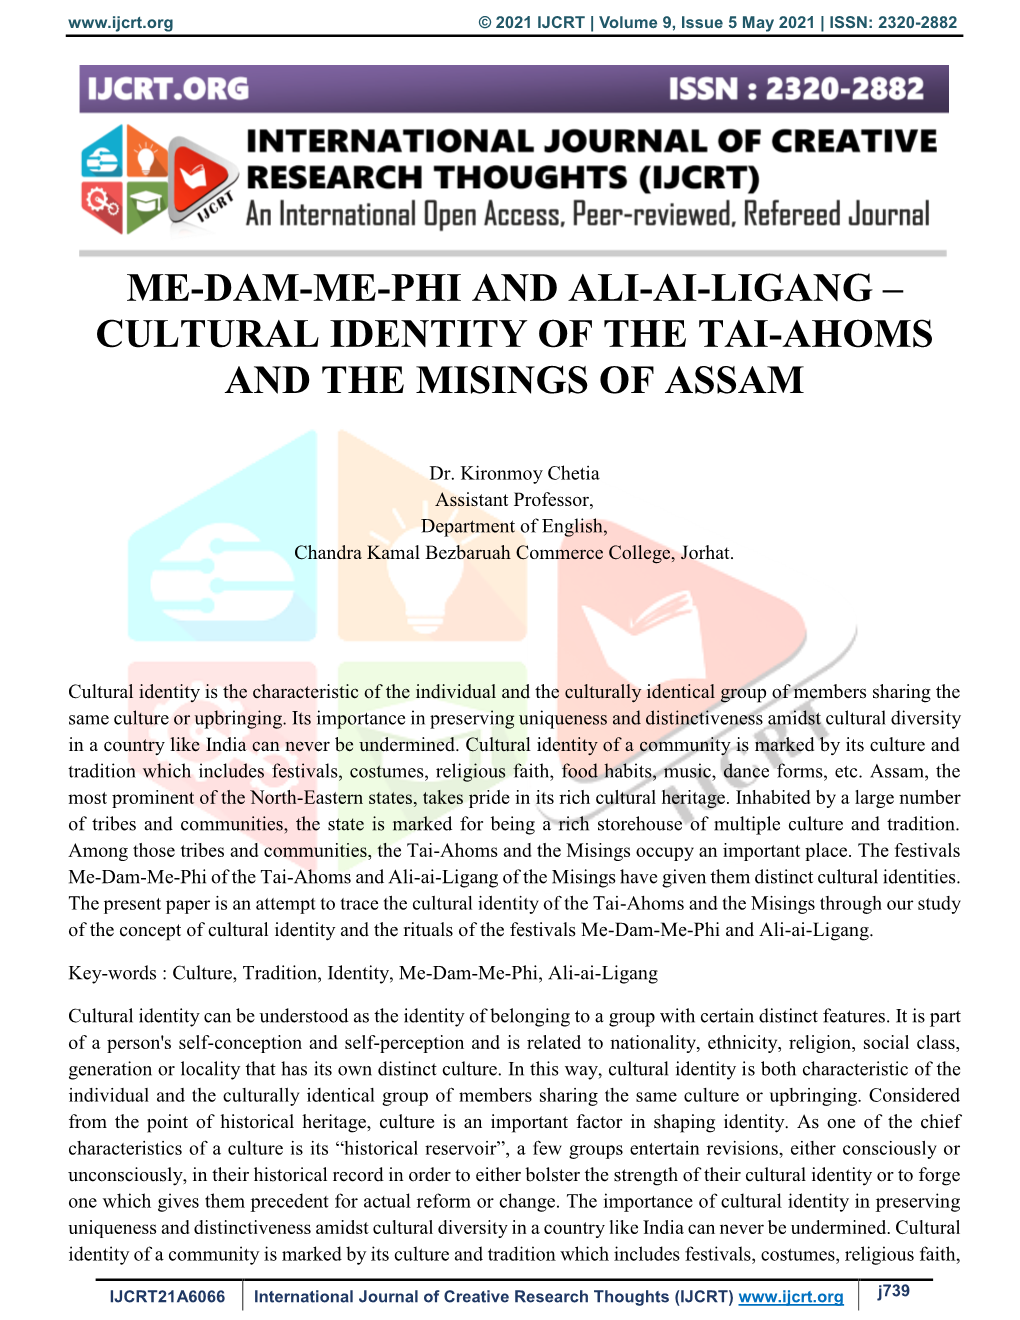 Me-Dam-Me-Phi and Ali-Ai-Ligang – Cultural Identity of the Tai-Ahoms and the Misings of Assam